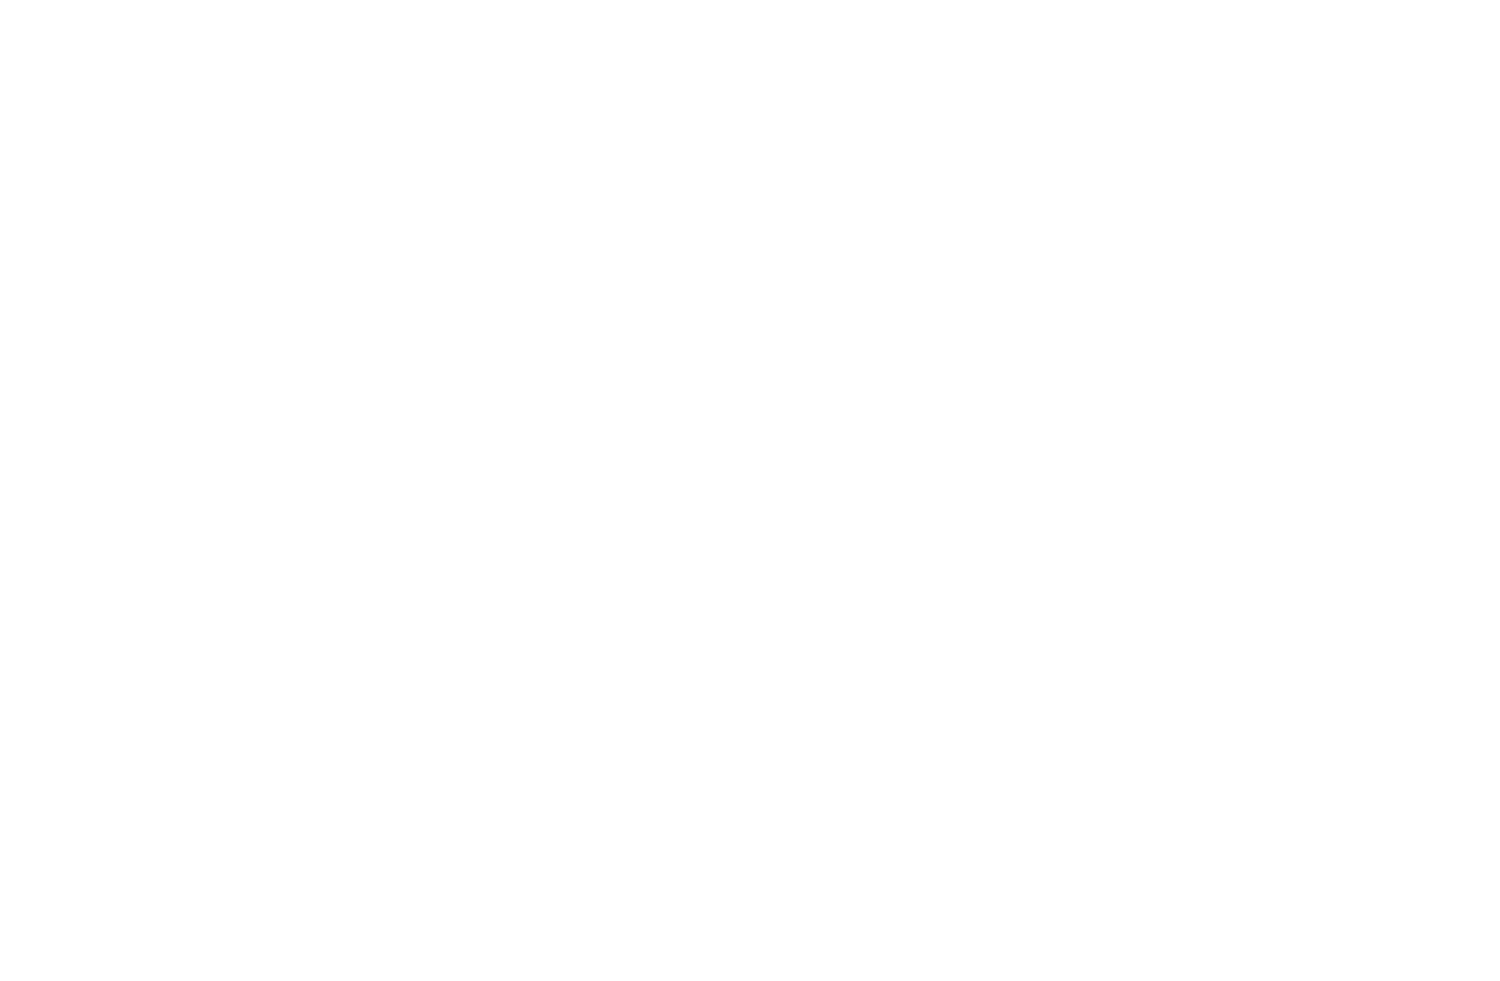 Audience Award - Green Fest 2019 - WHITE.png